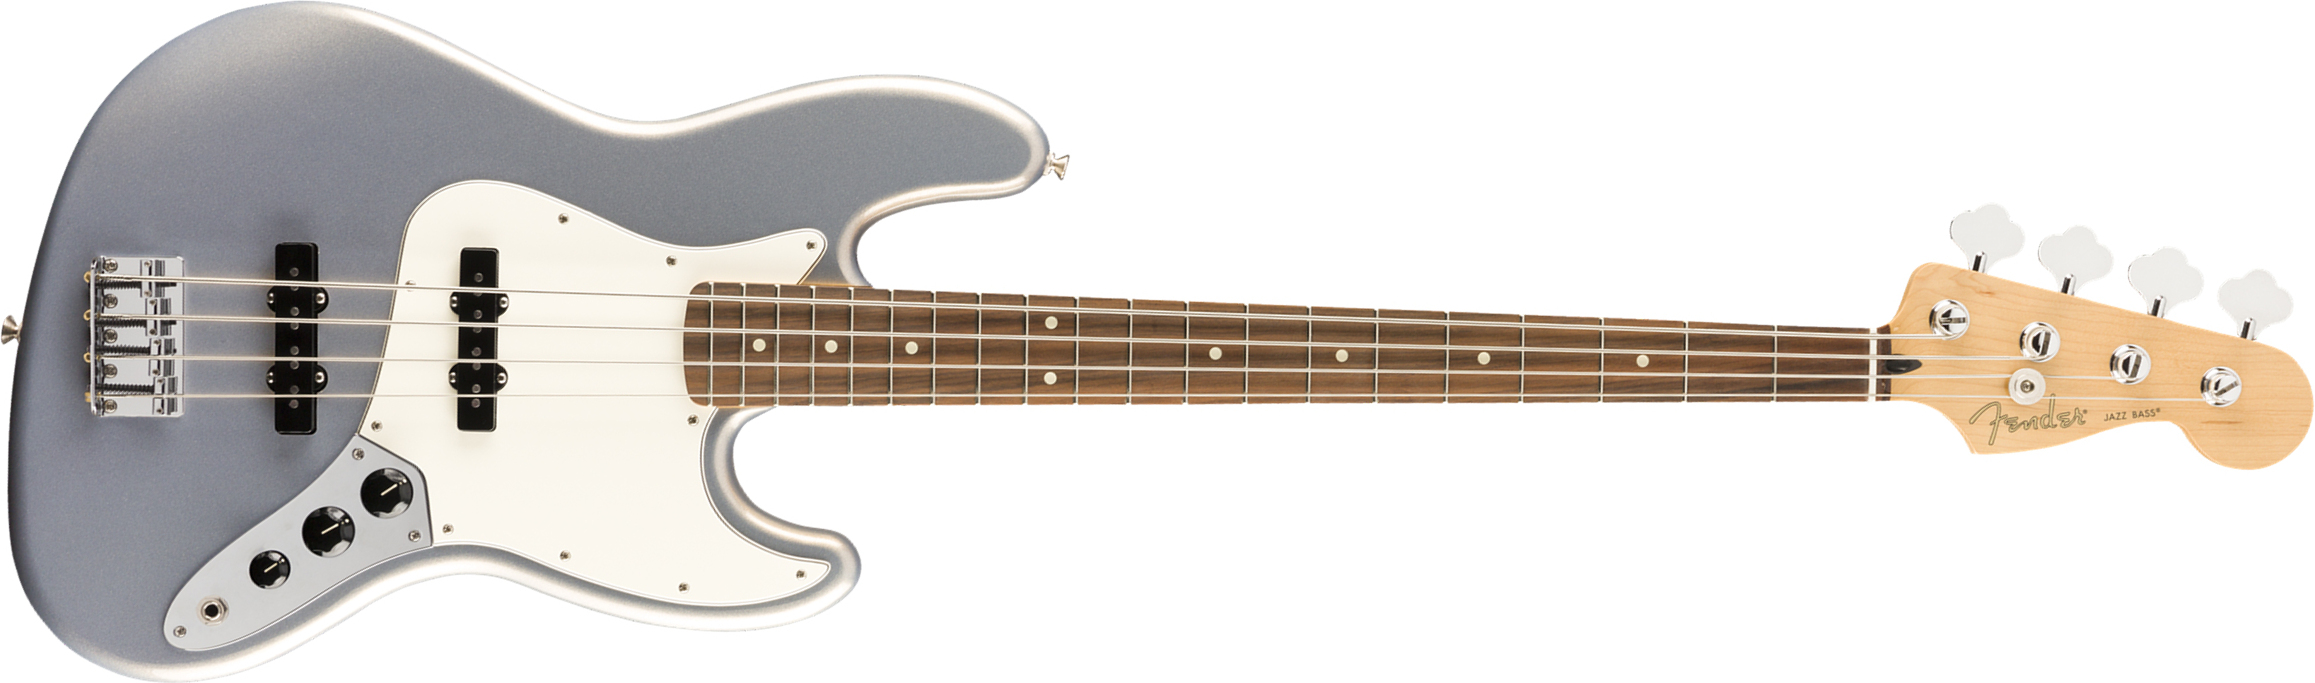 Fender Jazz Bass Player Mex Pf - Silver - Solid body electric bass - Main picture